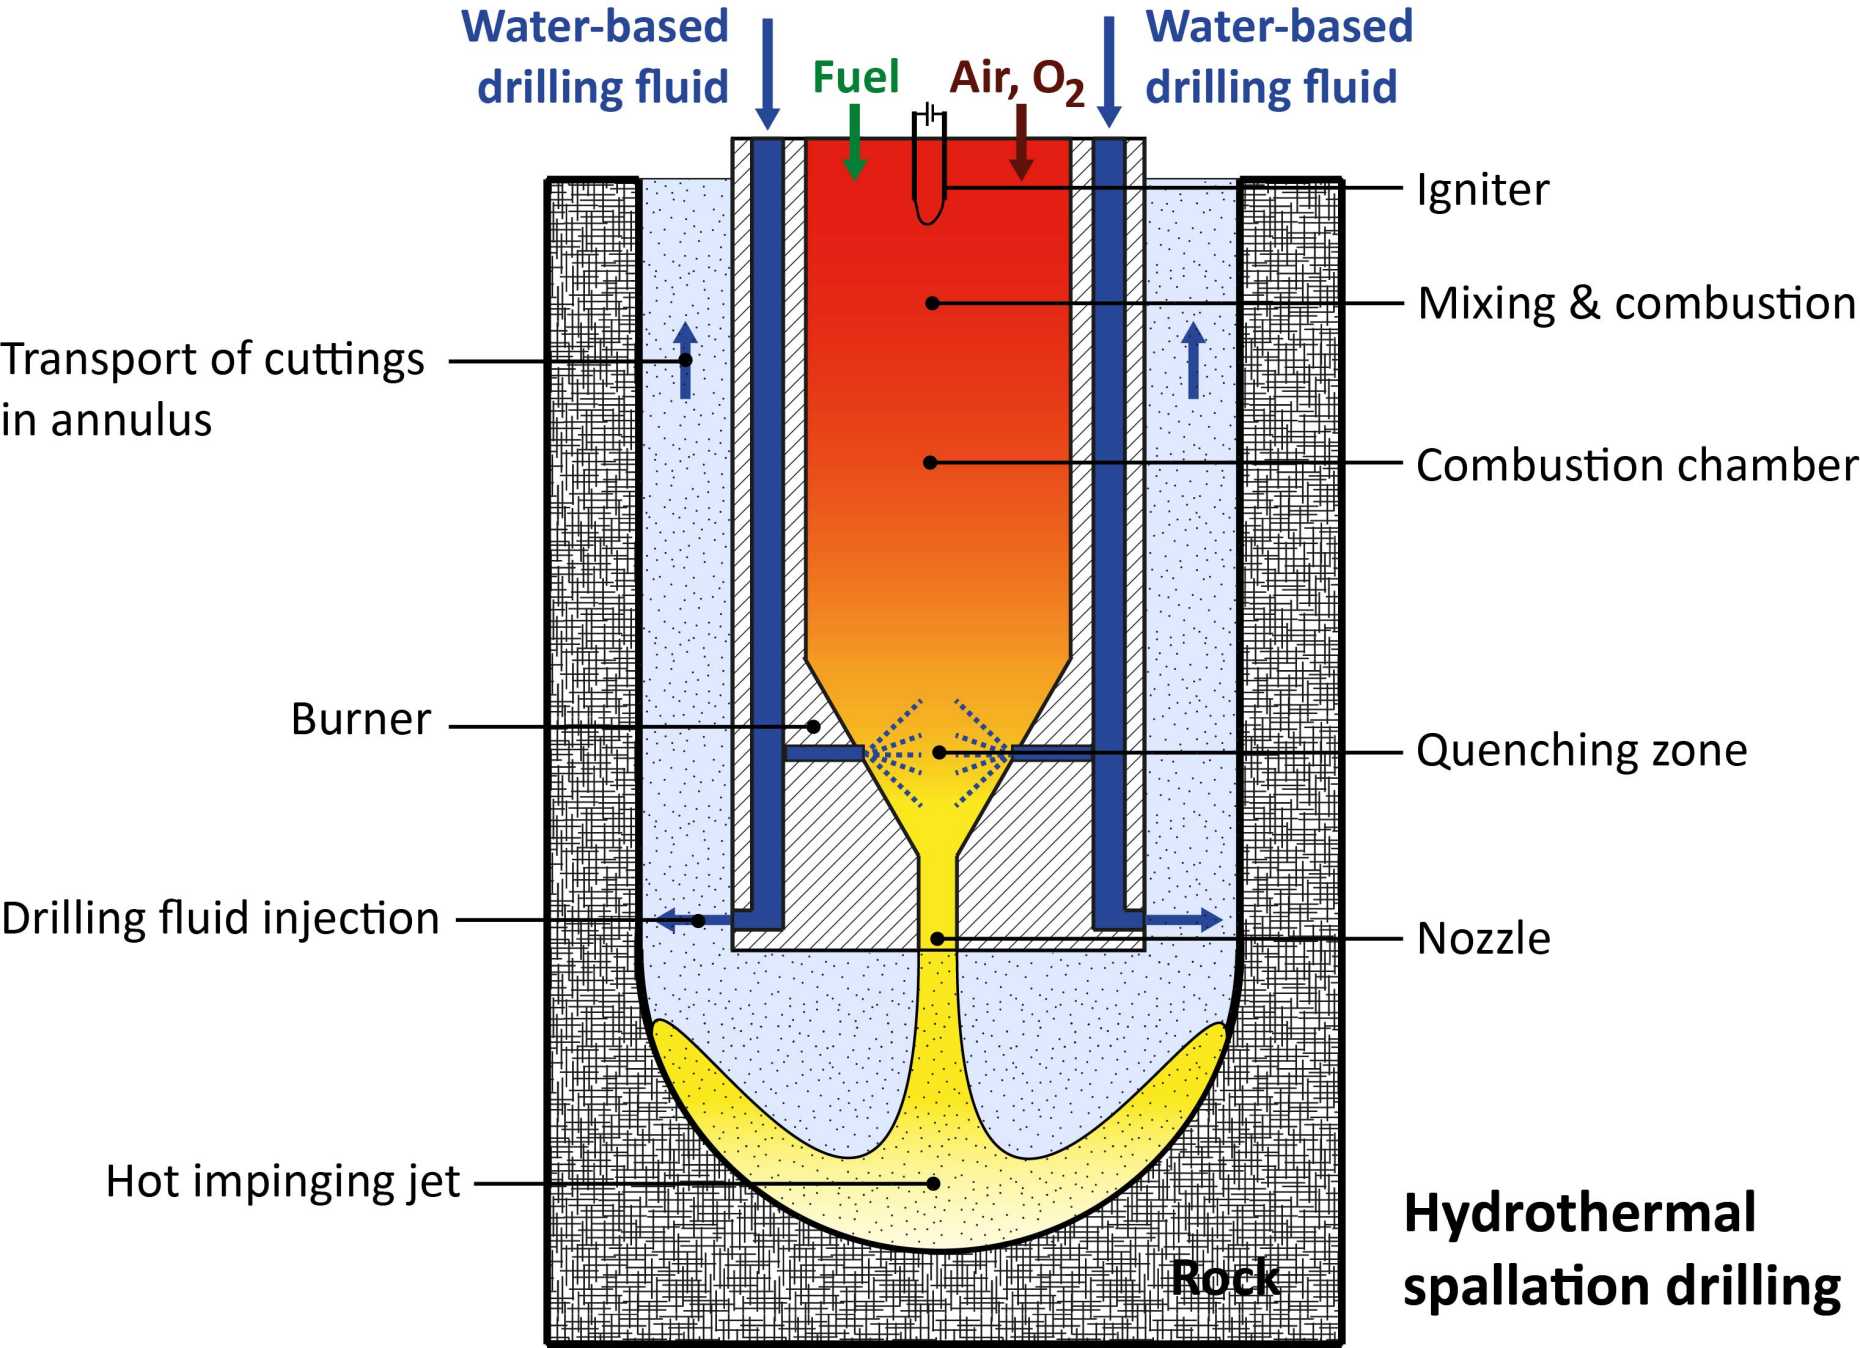 Enlarged view: Possible hydrothermal spallation drilling head in operation